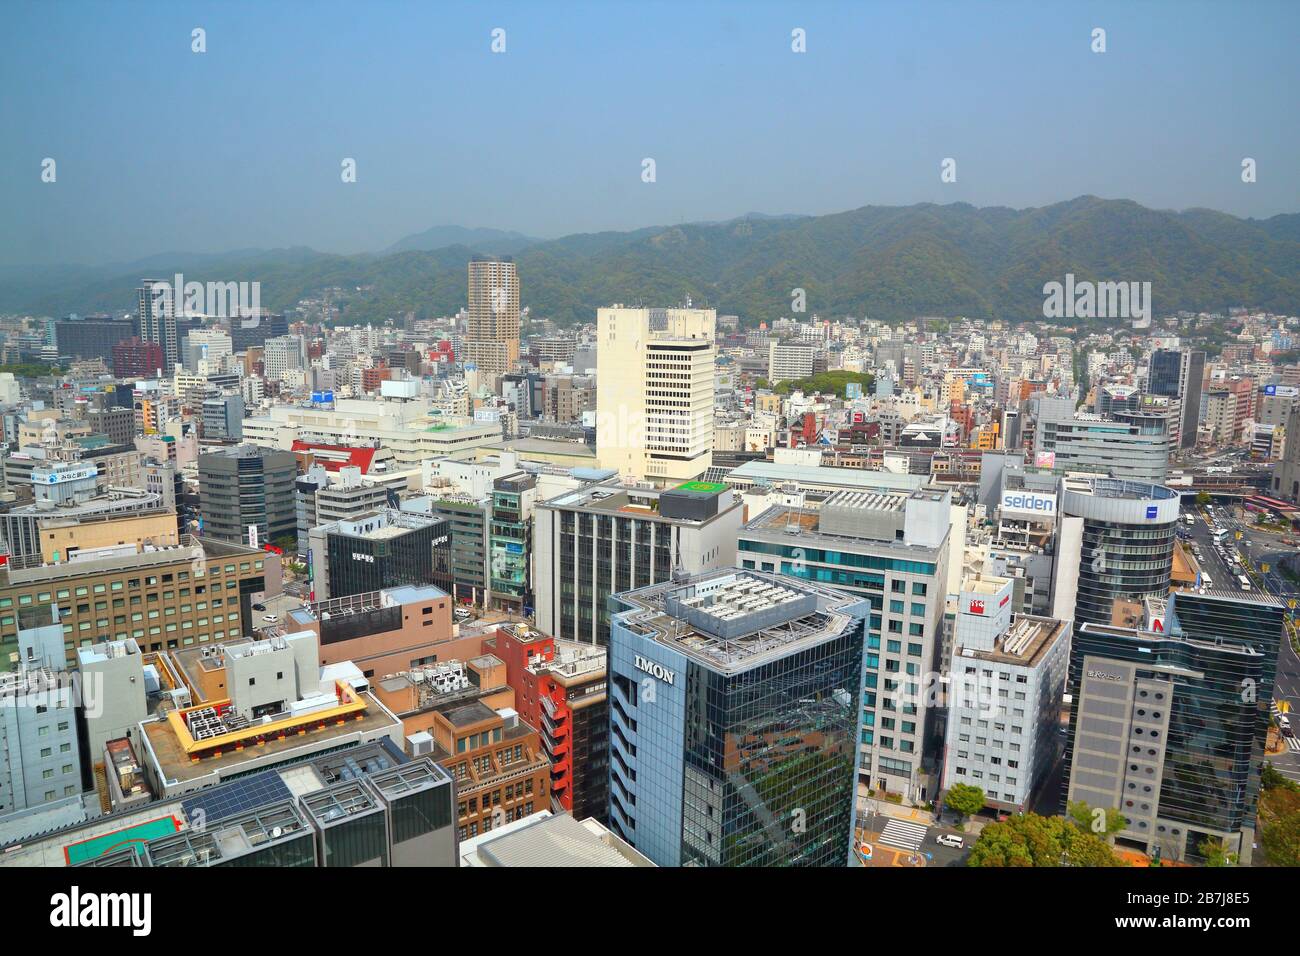 KOBE, JAPAN - APRIL 24, 2012: Aerial view of Kobe, Japan. Kobe is the 6th largest city of Japan, with population of 1.5m. Stock Photo